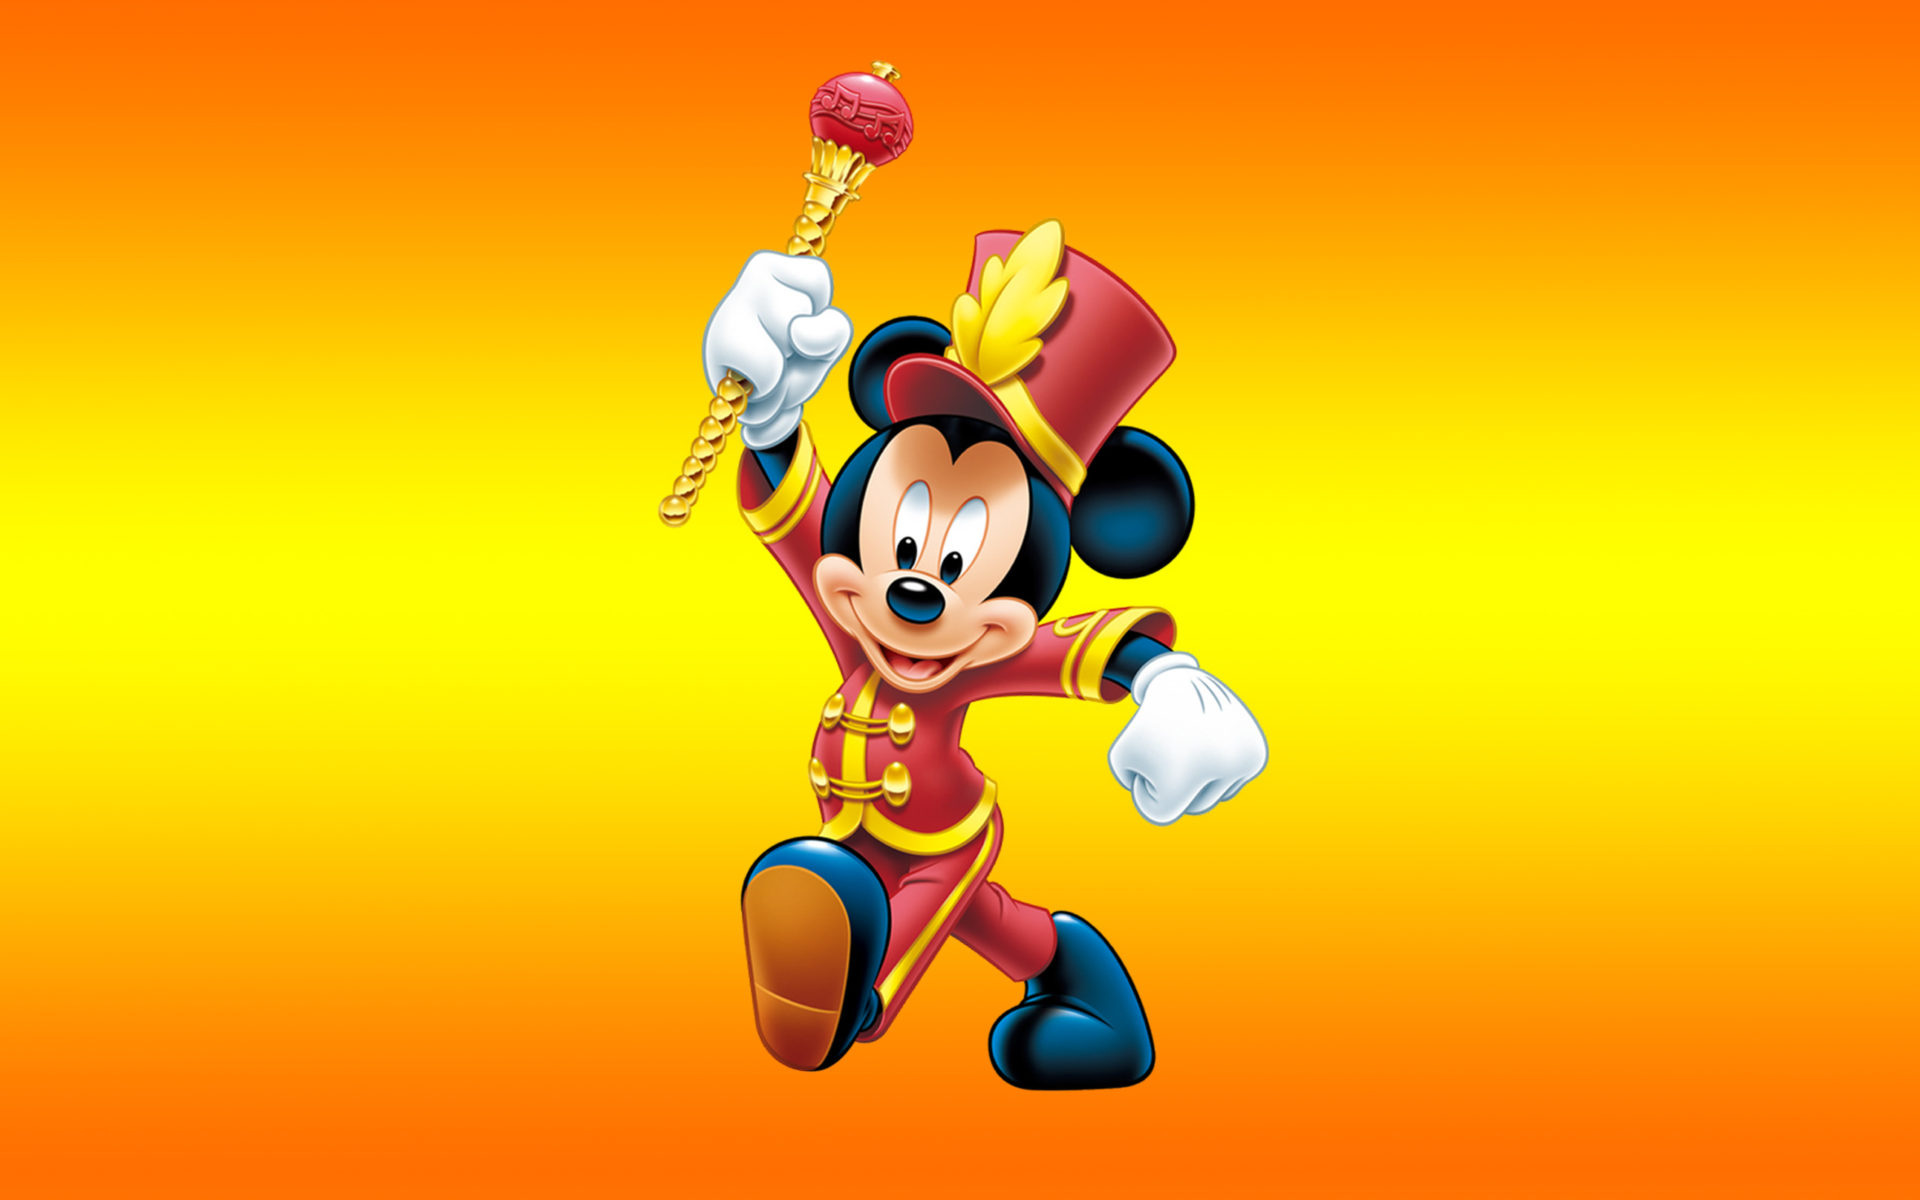 Mickey Mouse as band leader, Swagger and style, HD wallpapers for various devices, 1920x1200 HD Desktop